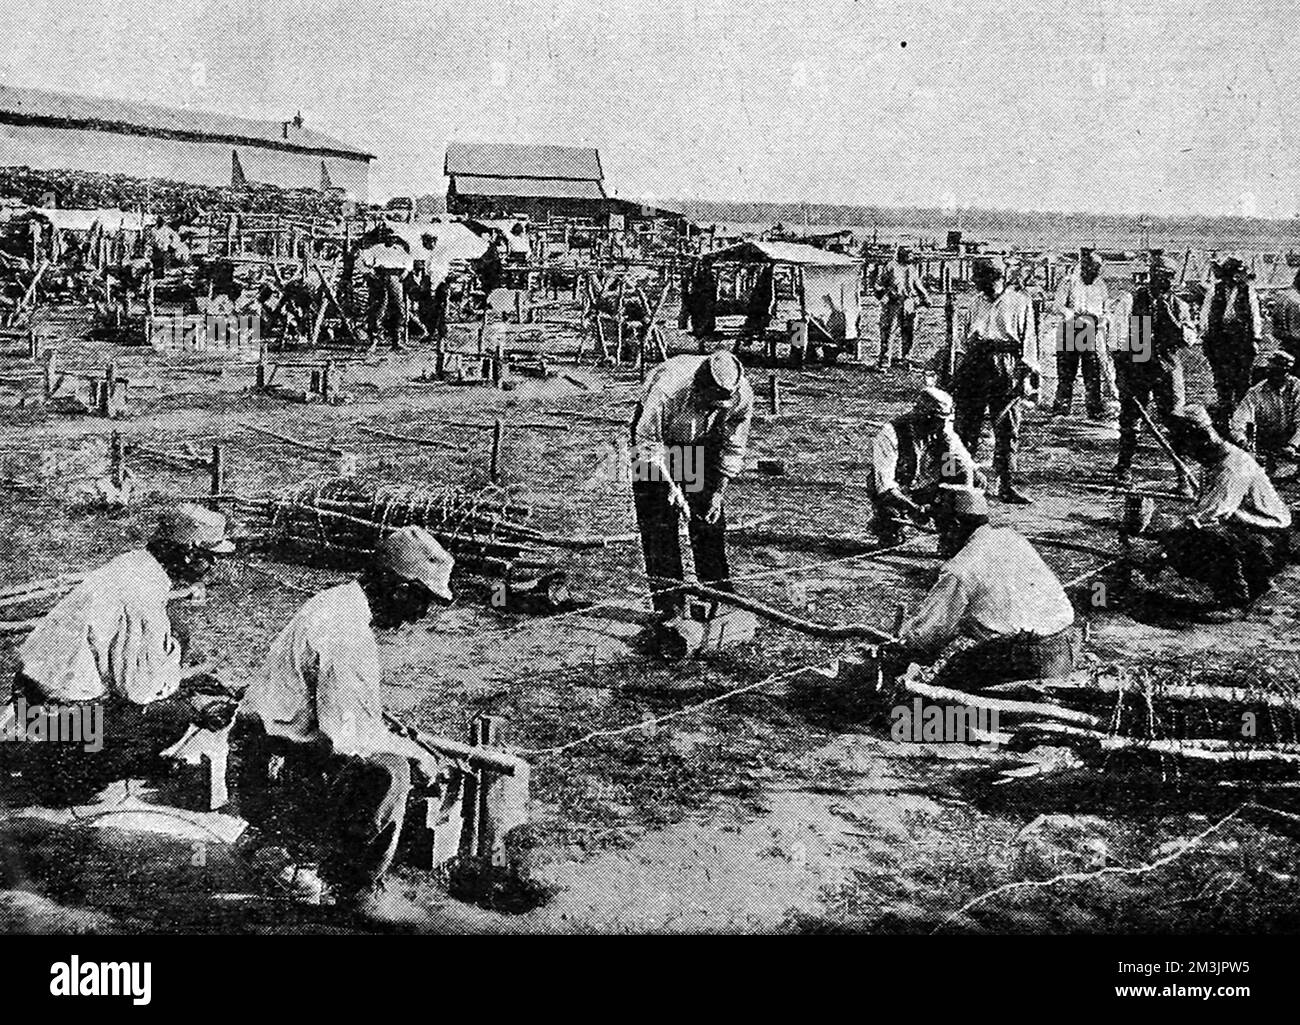 French soldiers at work on the Champagne front making barbed wire entanglements for French defences during World War I.     Date: November 13th 1915 Stock Photo